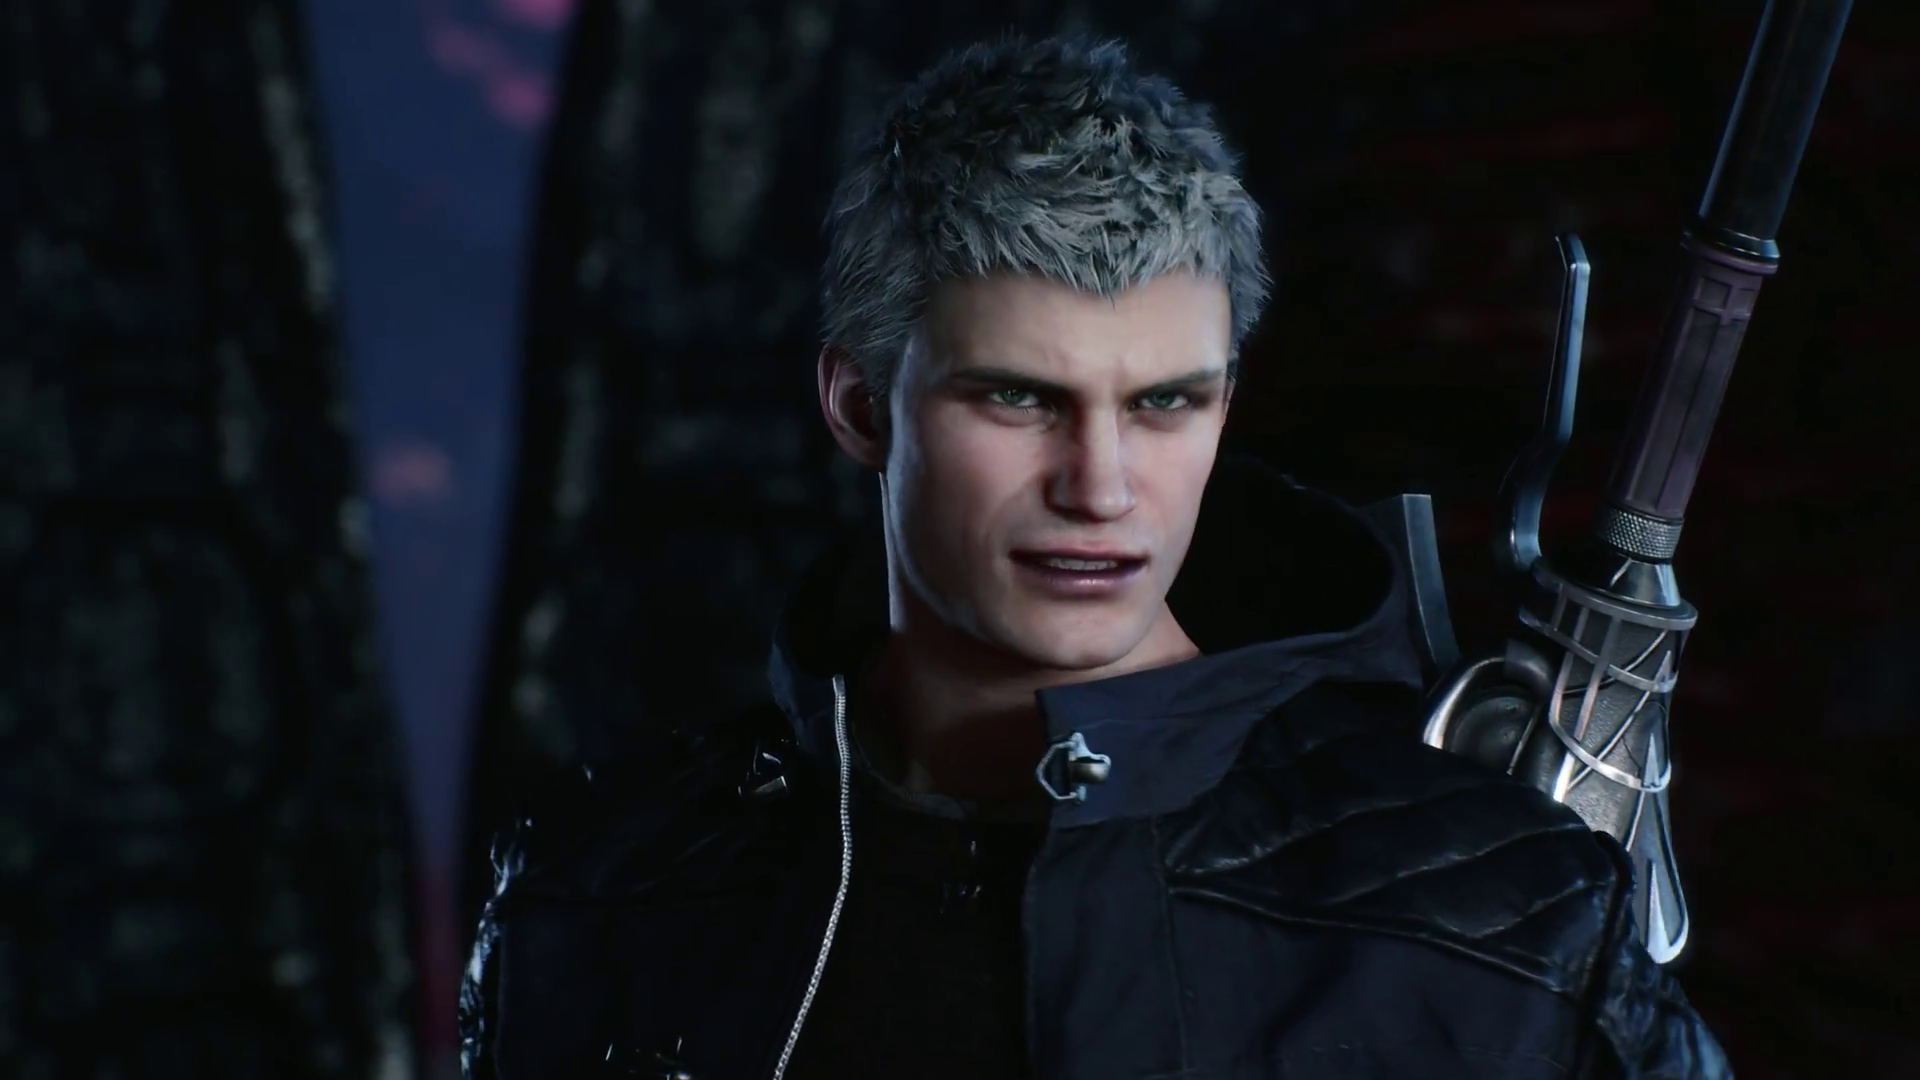 Devil May Cry 5 - Final Trailer